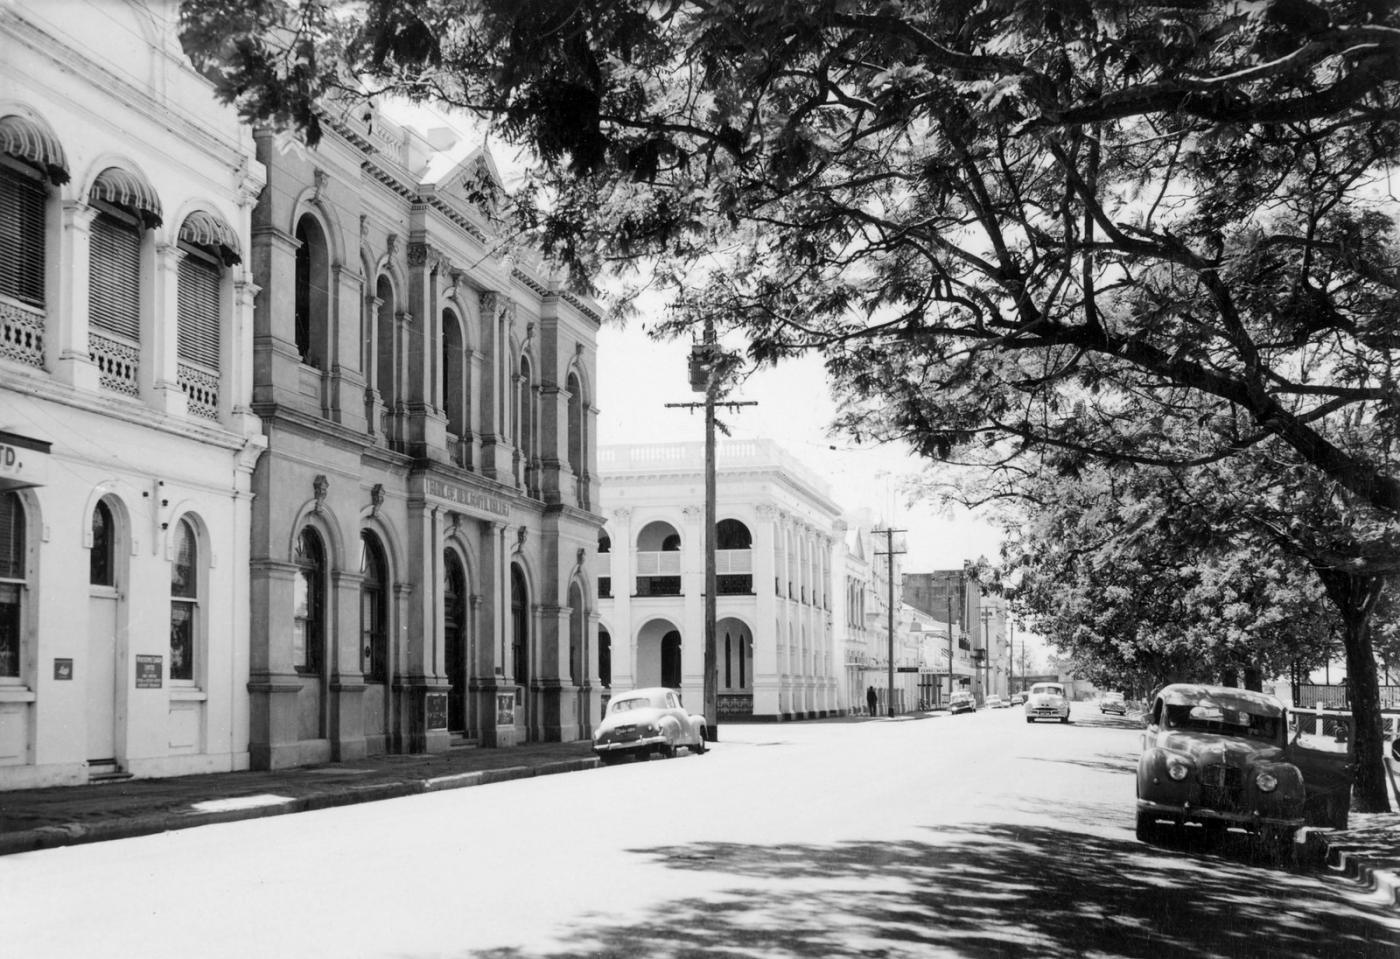 Showing the tree lined street and solid stone facade of Quay Street, Rockhampton